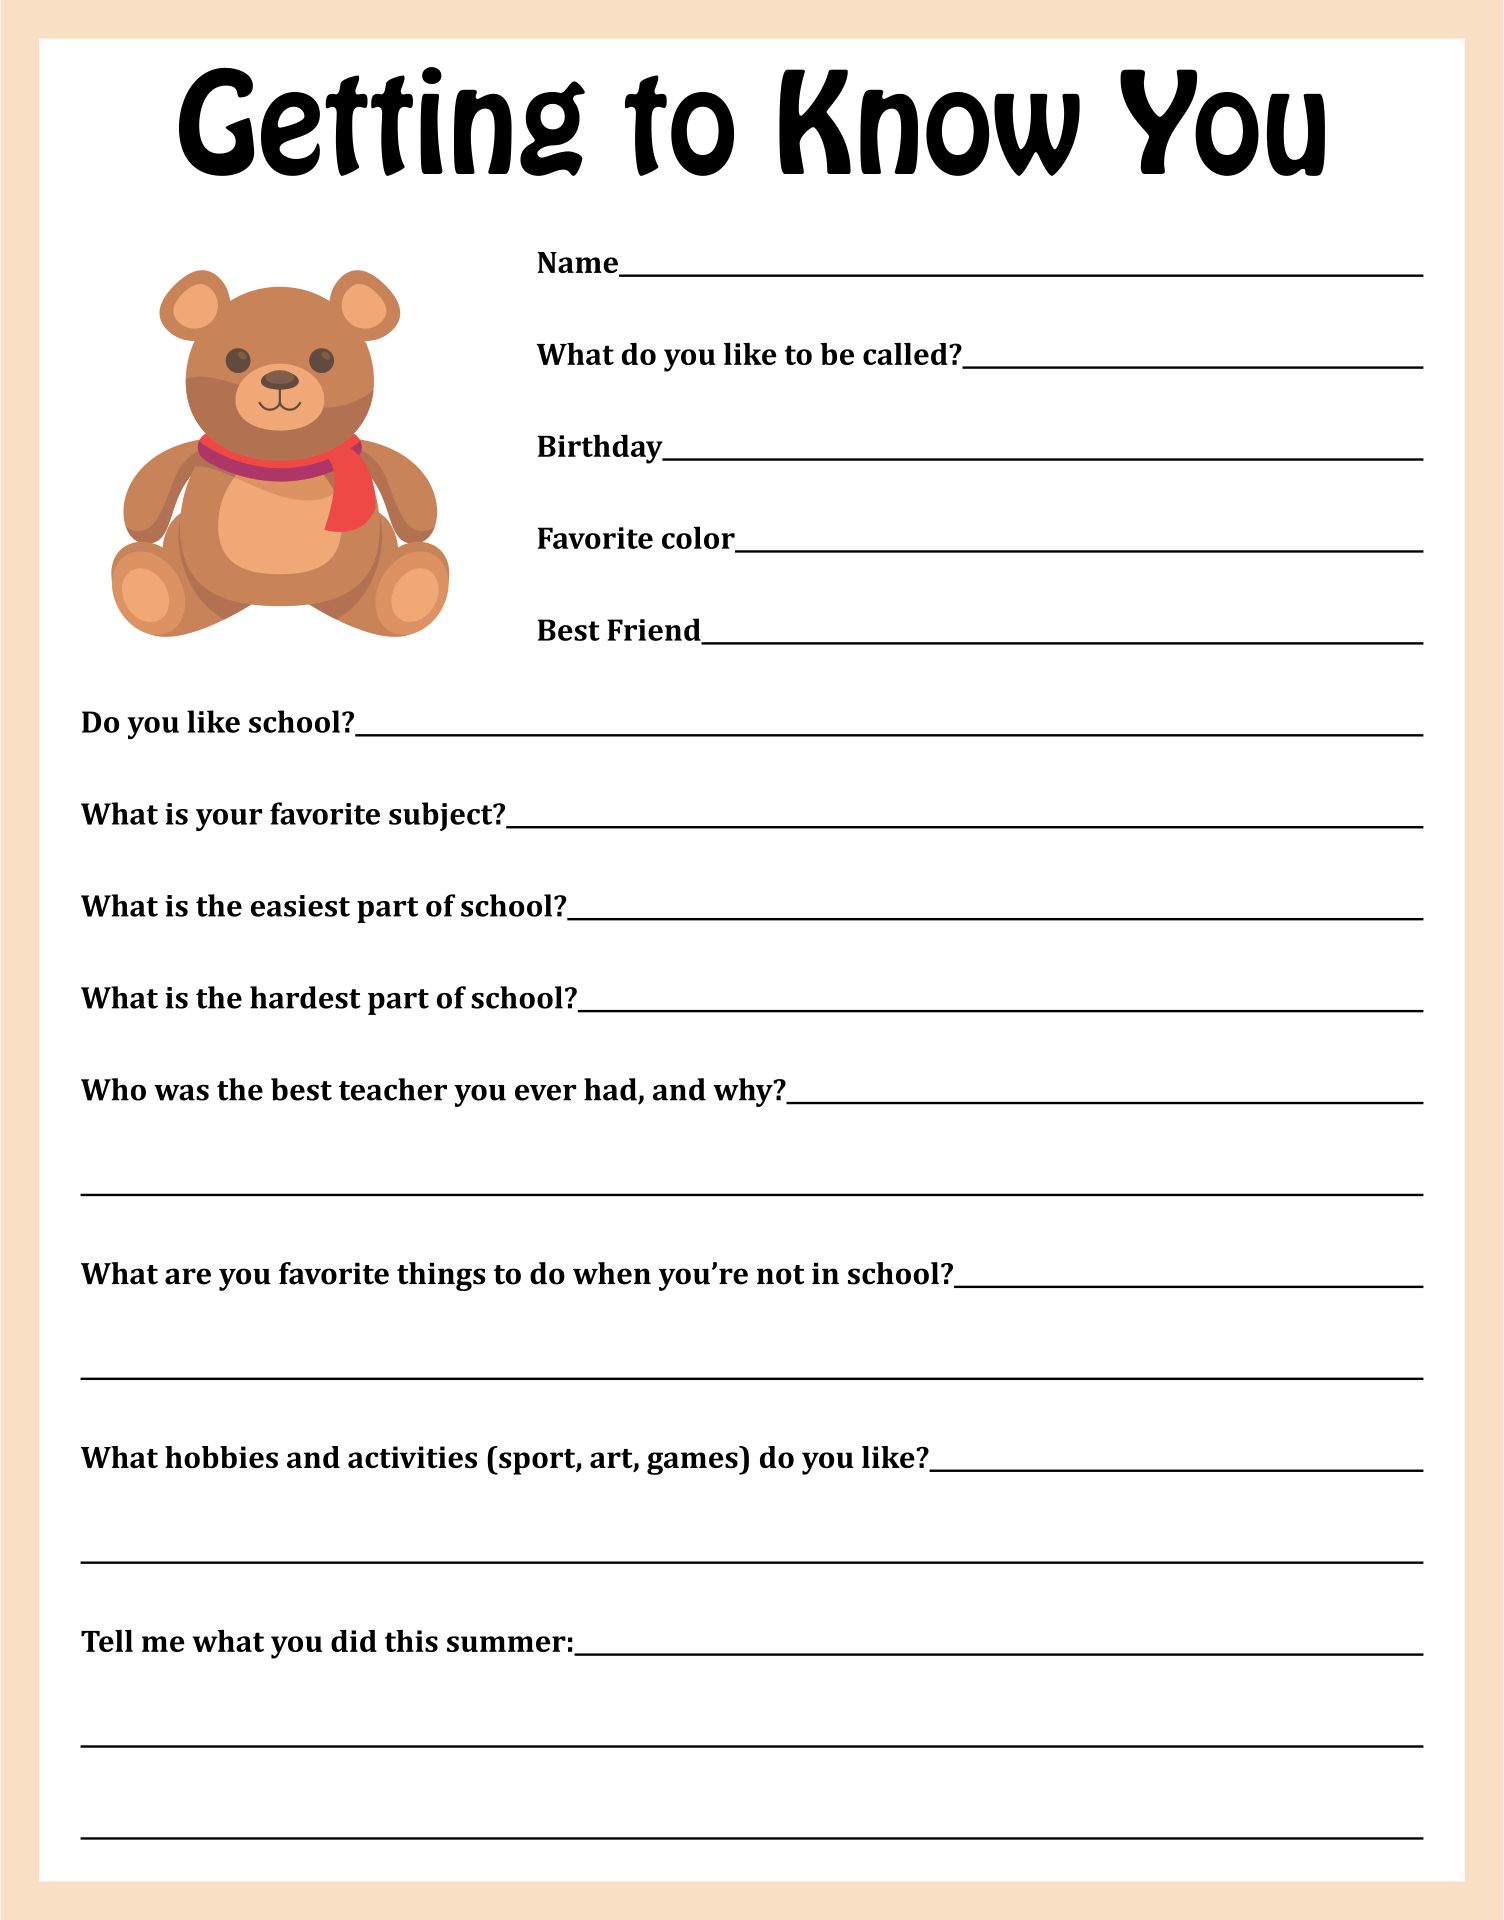 Ligia Marstaller Getting To Know You Questions Worksheet Pdf